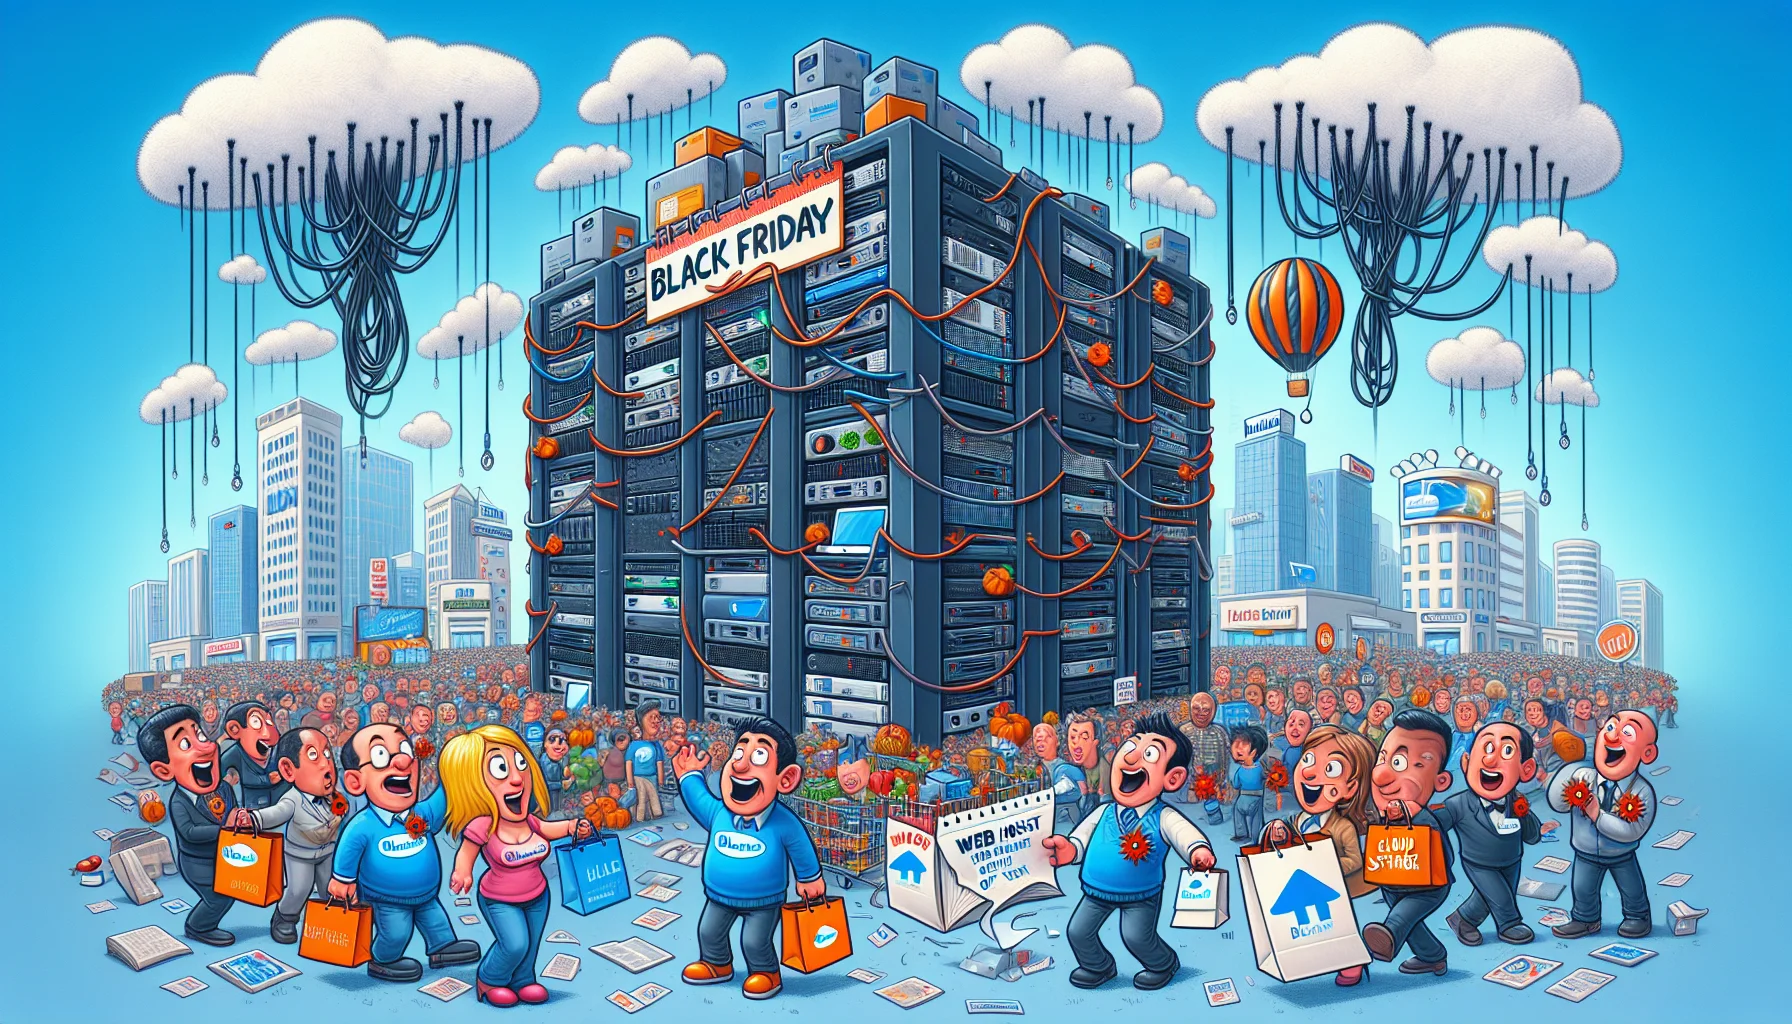 A humorous depiction of a Black Friday sale. A bustling virtual market is filled with symbolic representations of technical elements typical of web hosting. There are hardware racks stacked high like skyscrapers, dangling interweaving ethernet cables, and fluffy clouds labeled as 'cloud storage'. Just above, a giant calendar is torn to reveal the date as 'Black Friday'. Excited cartoon-style customer characters of various descents like Caucasian, Hispanic, Middle-Eastern, and Asian, each holding a giant shopping bag with the emblem of a blue-colored bird house, indicative of Bluehost. A huge banner across the scene says 'BlueHost, Web Hosting's Biggest Sale of the Year!